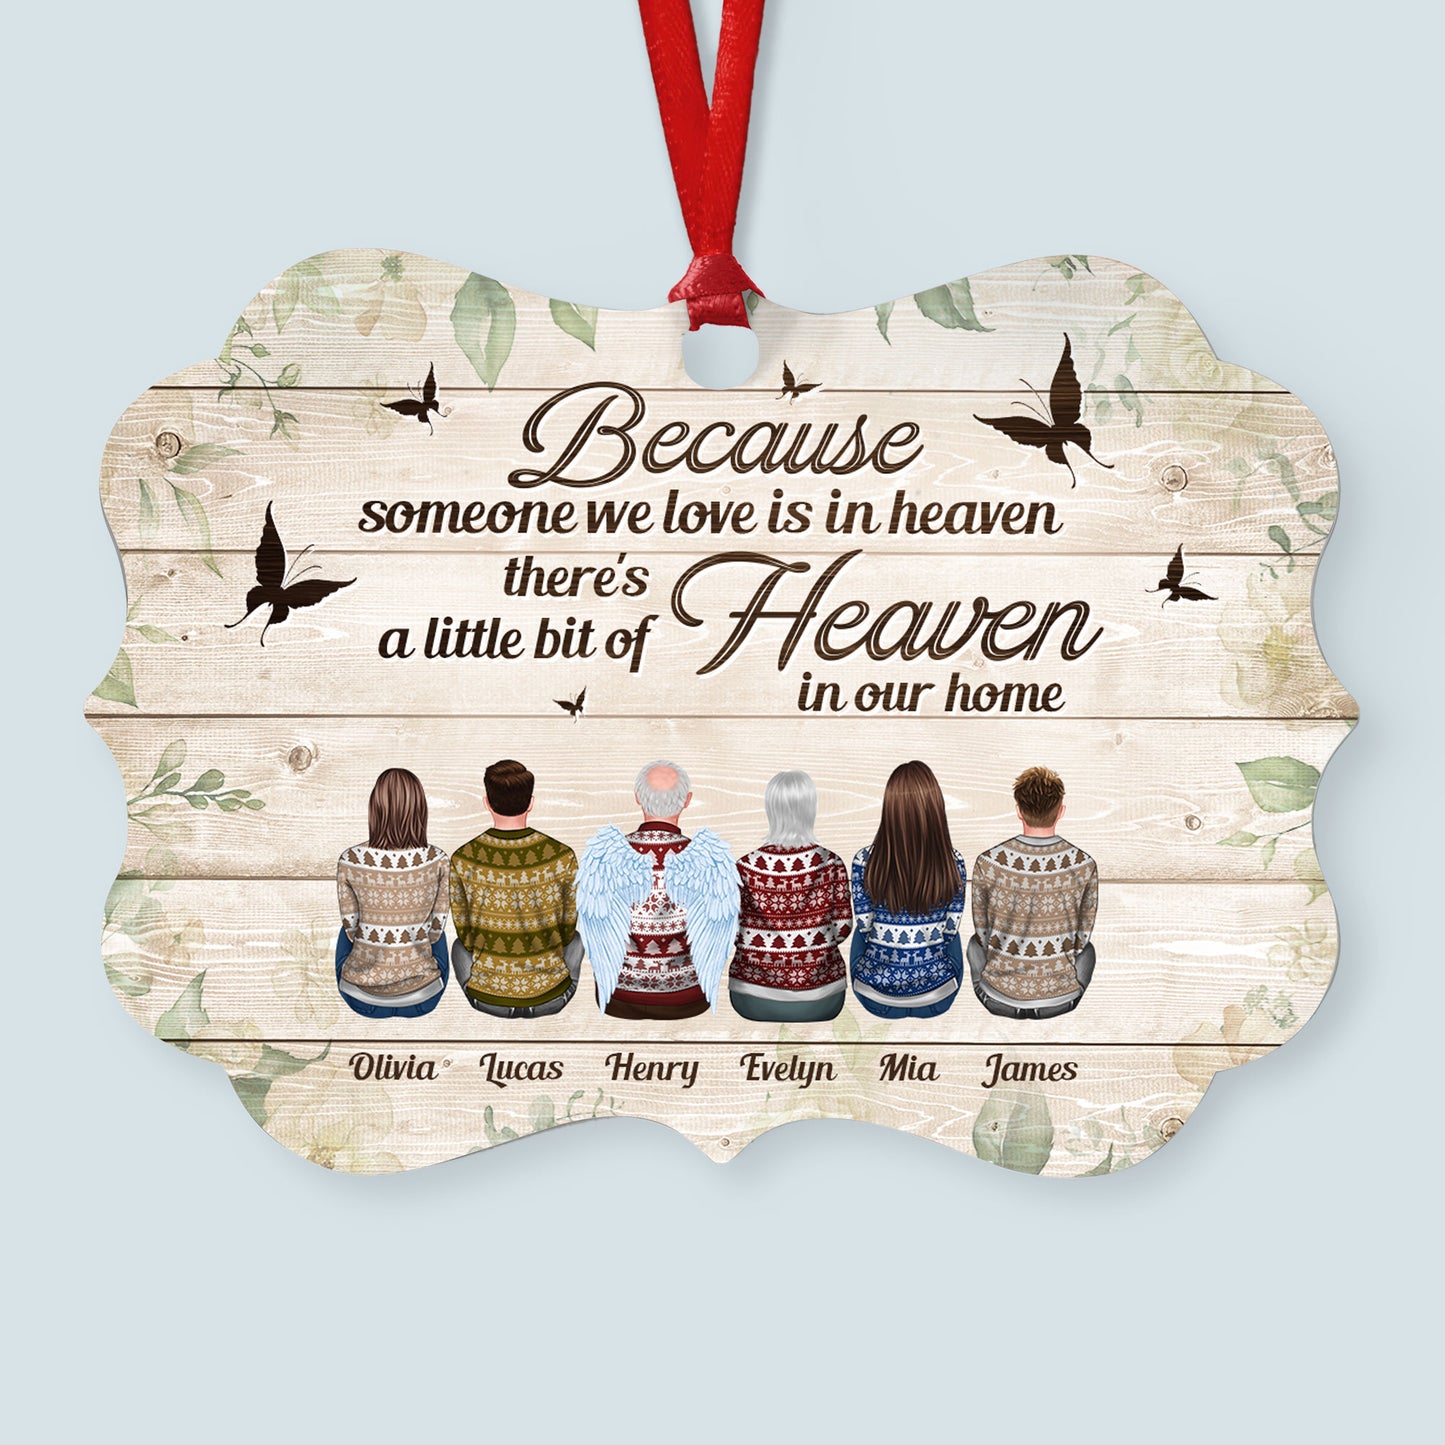 Because Someone We Love Is In Heaven - Personalized Aluminum Ornament - Christmas Gift Memorial Ornament For Family